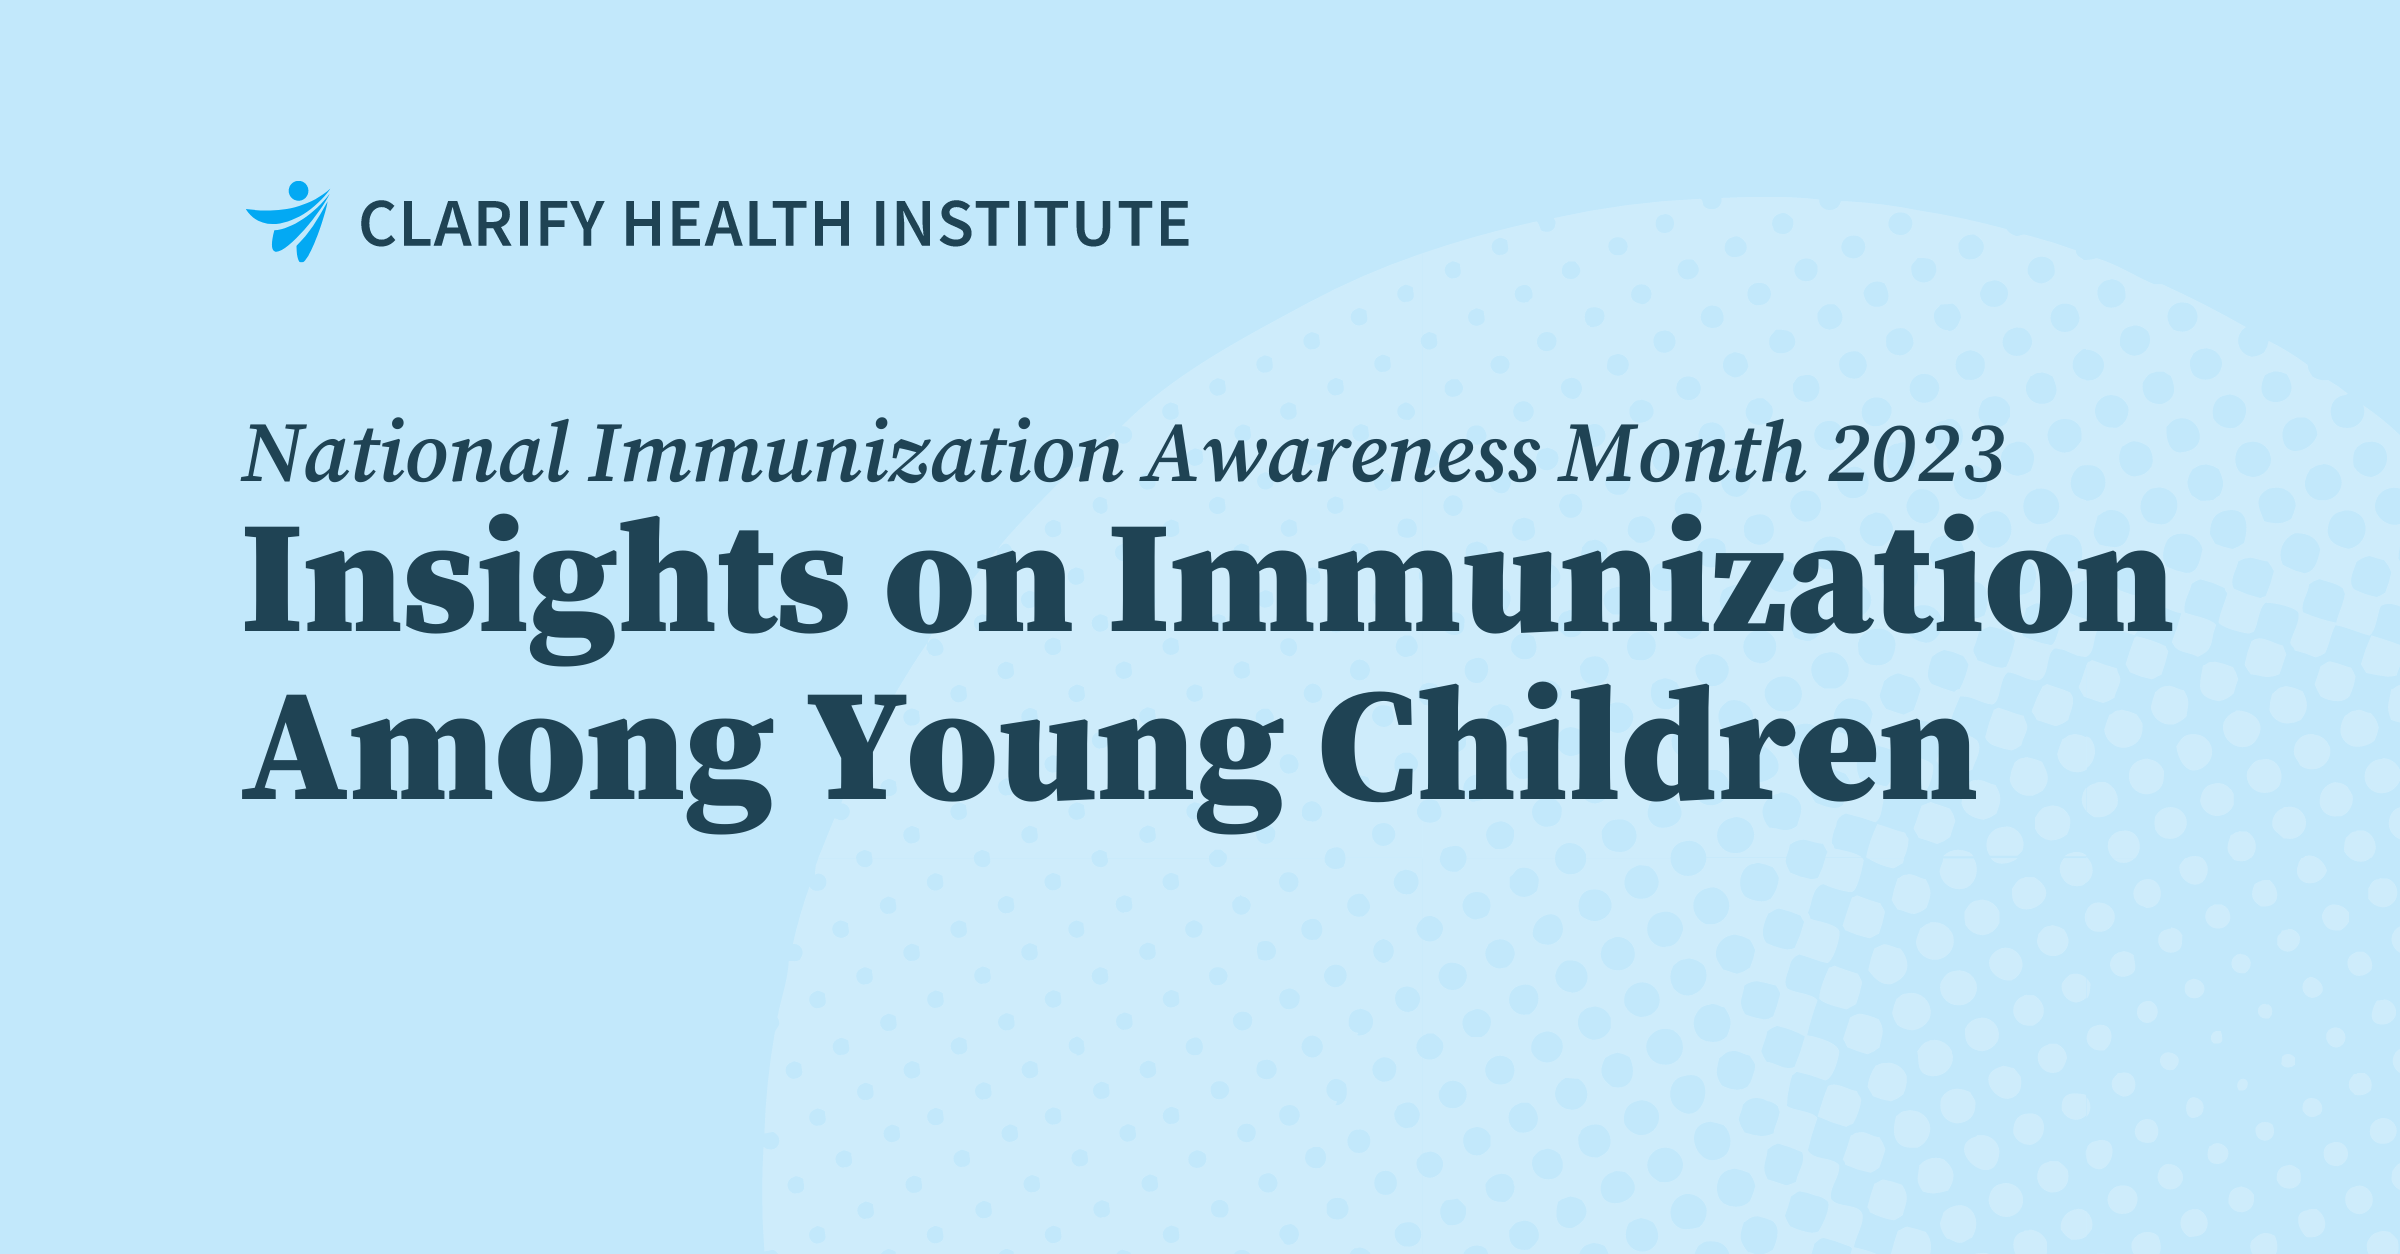 Thumbnail for Insights on Immunization Among Young Children from the Clarify Health Institute